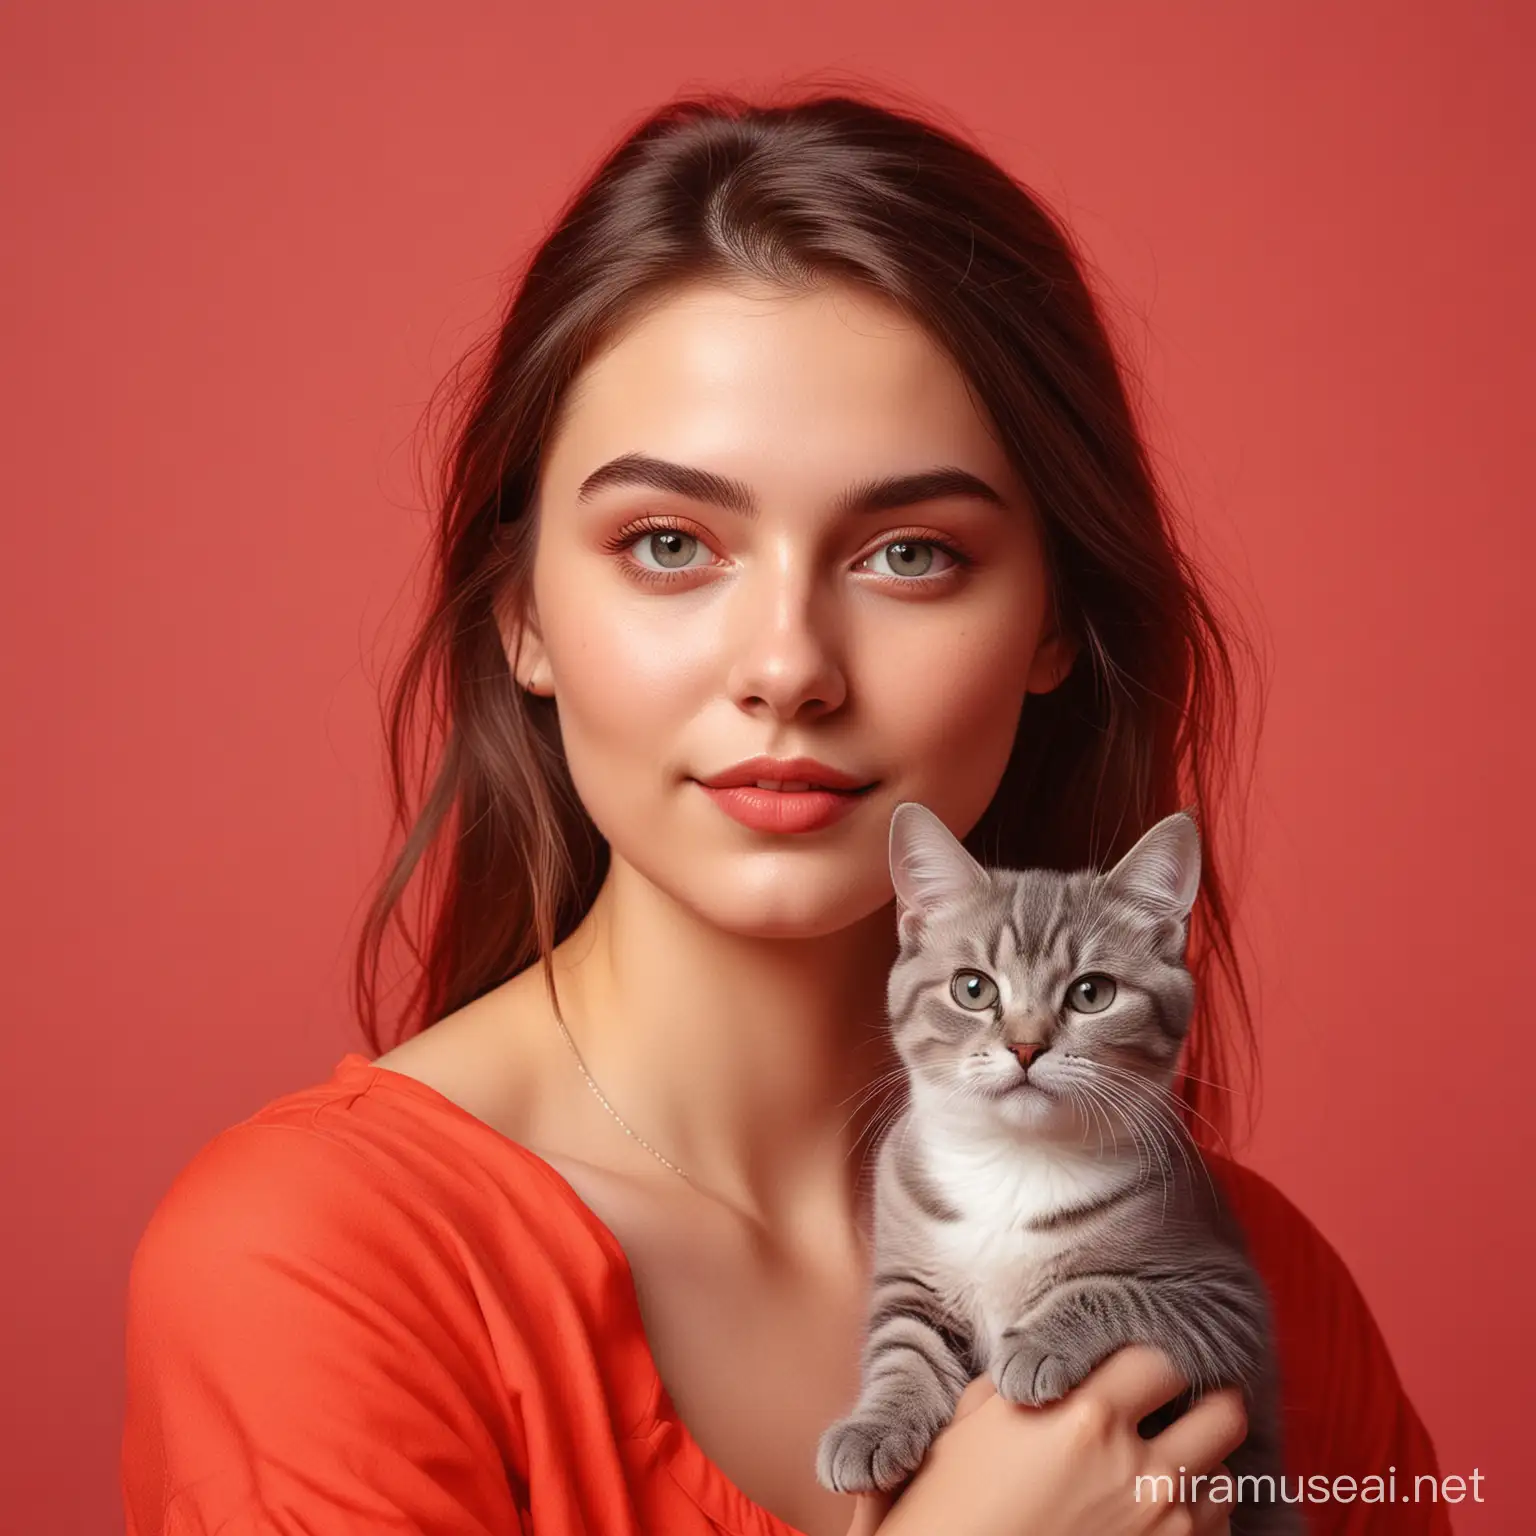 Bright realistic picture of a modern young girl and her cat on a bright crimson background